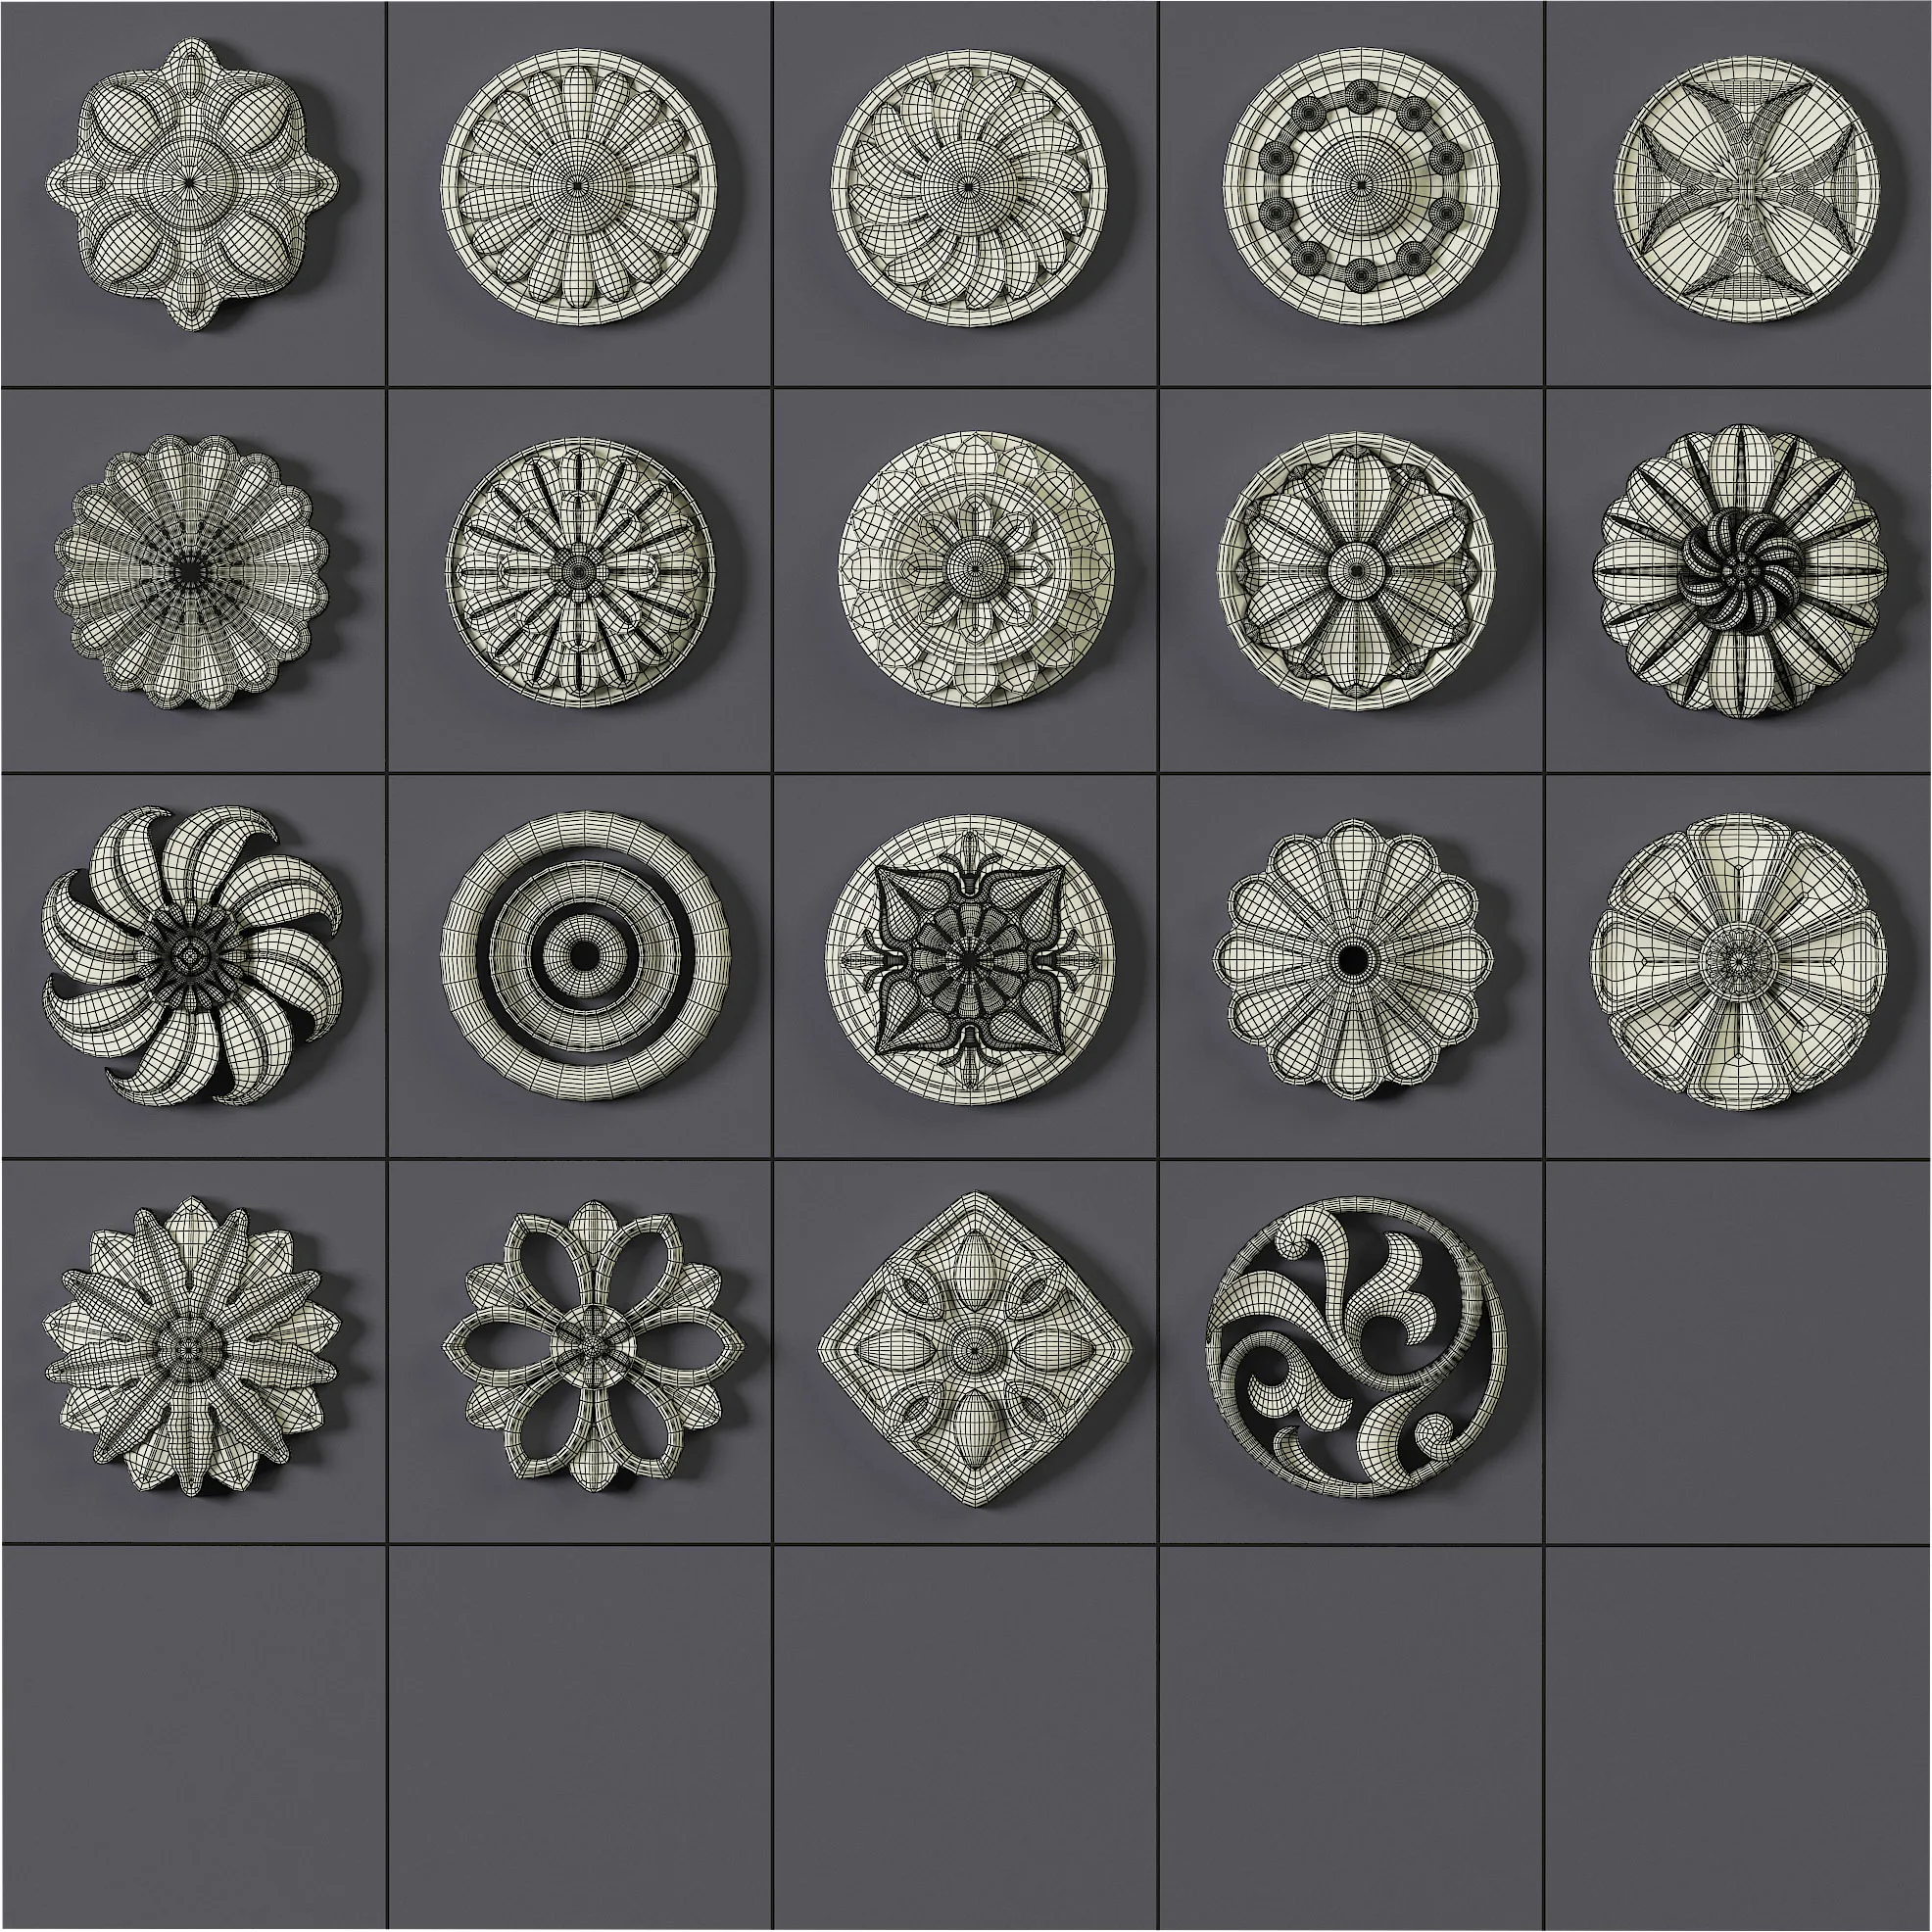 150 Ornament Brushes and Alphas Vol 01